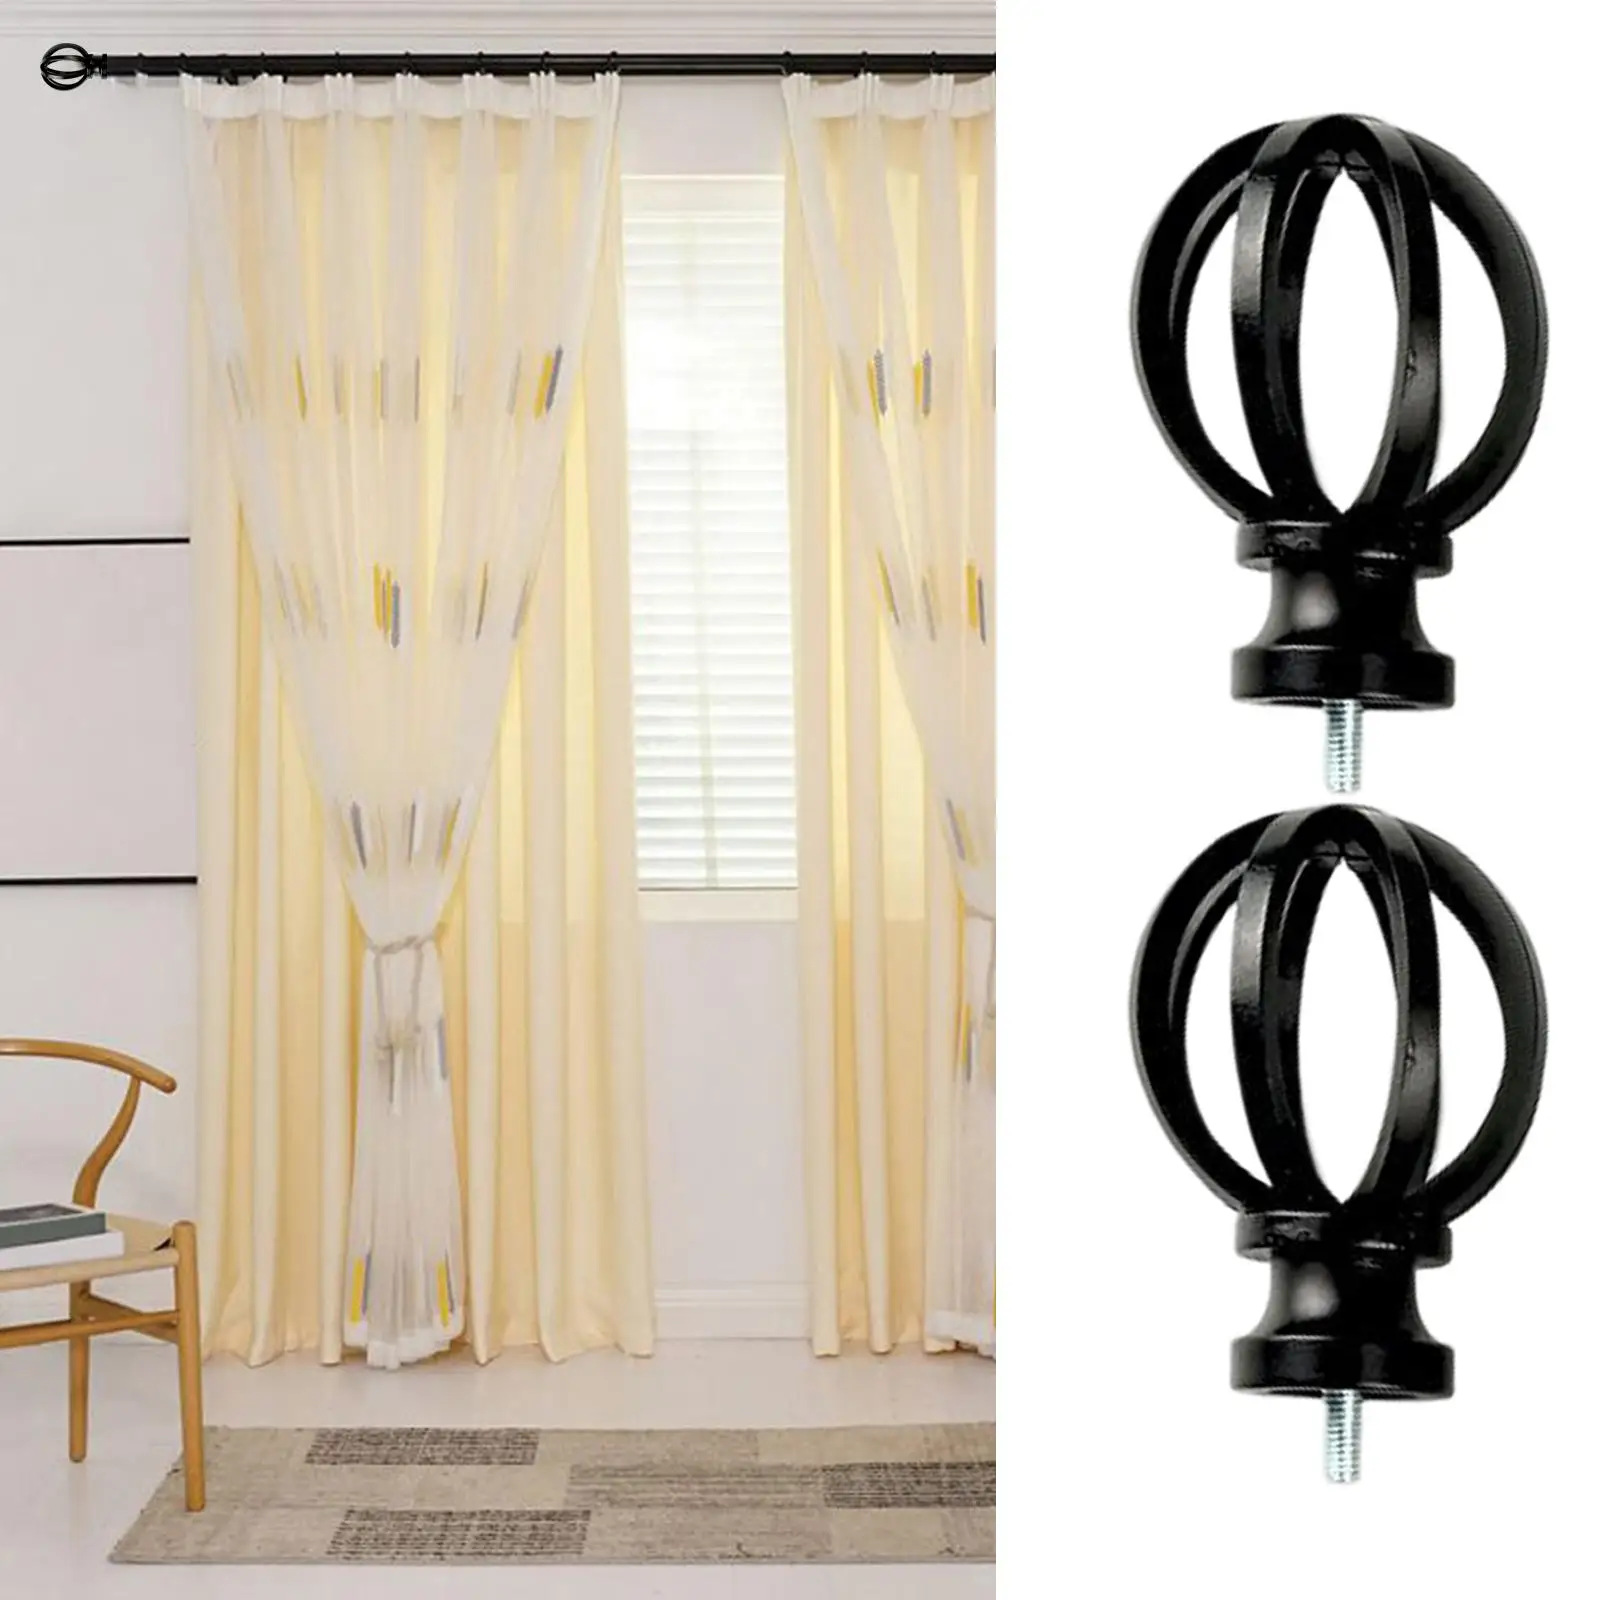 2x Cage Replacement Curtain Rod Finials 5/8 inch Decoration Vintage Accessories Drapery Rod Finials for Bathroom Home Office